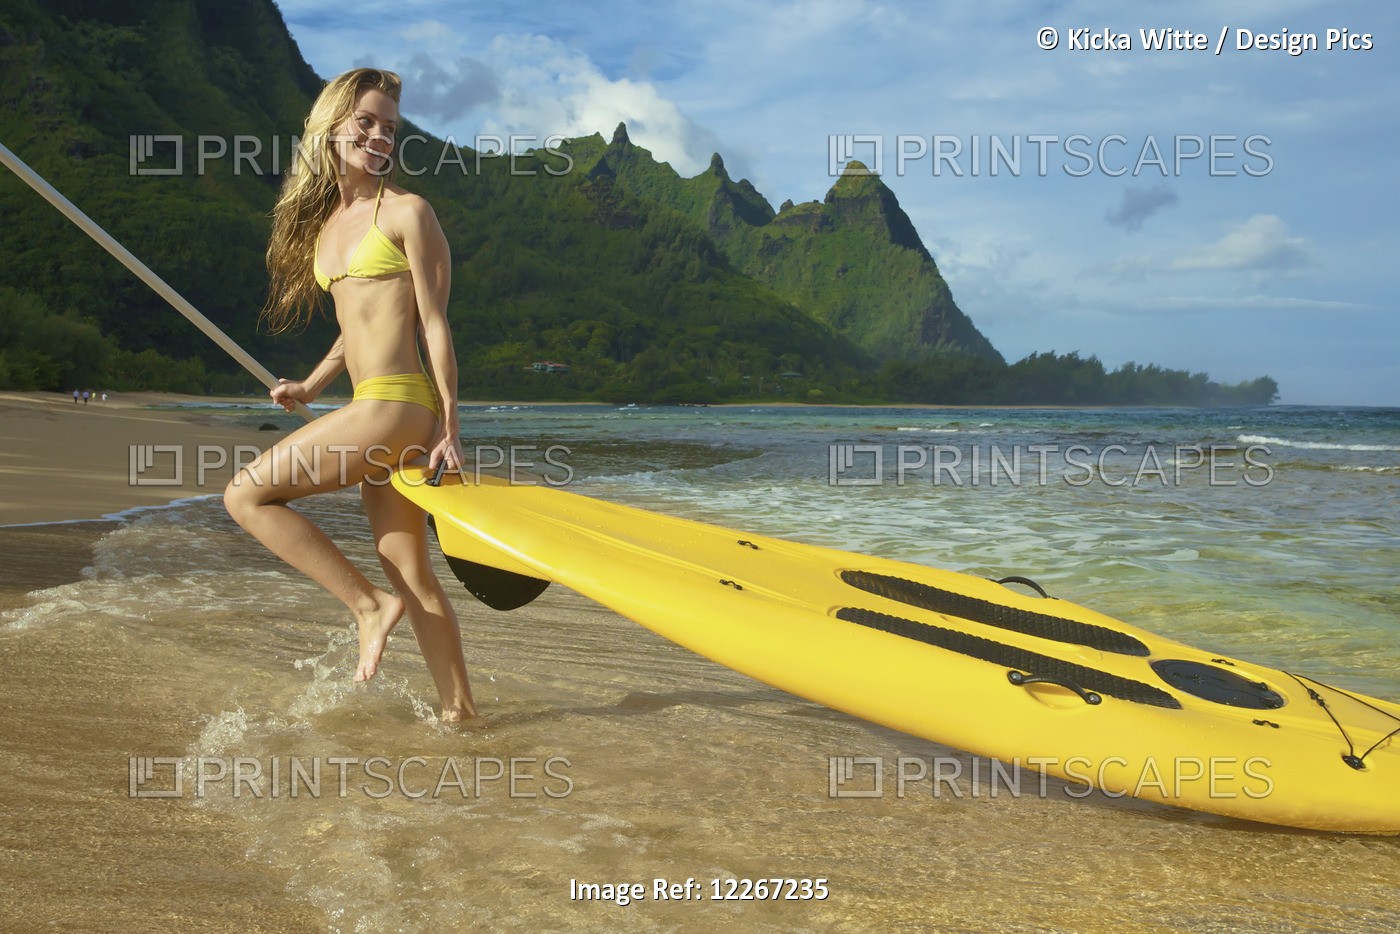 Young Woman With Stand Up Paddle Board; Kauai, Hawaii, United States Of America